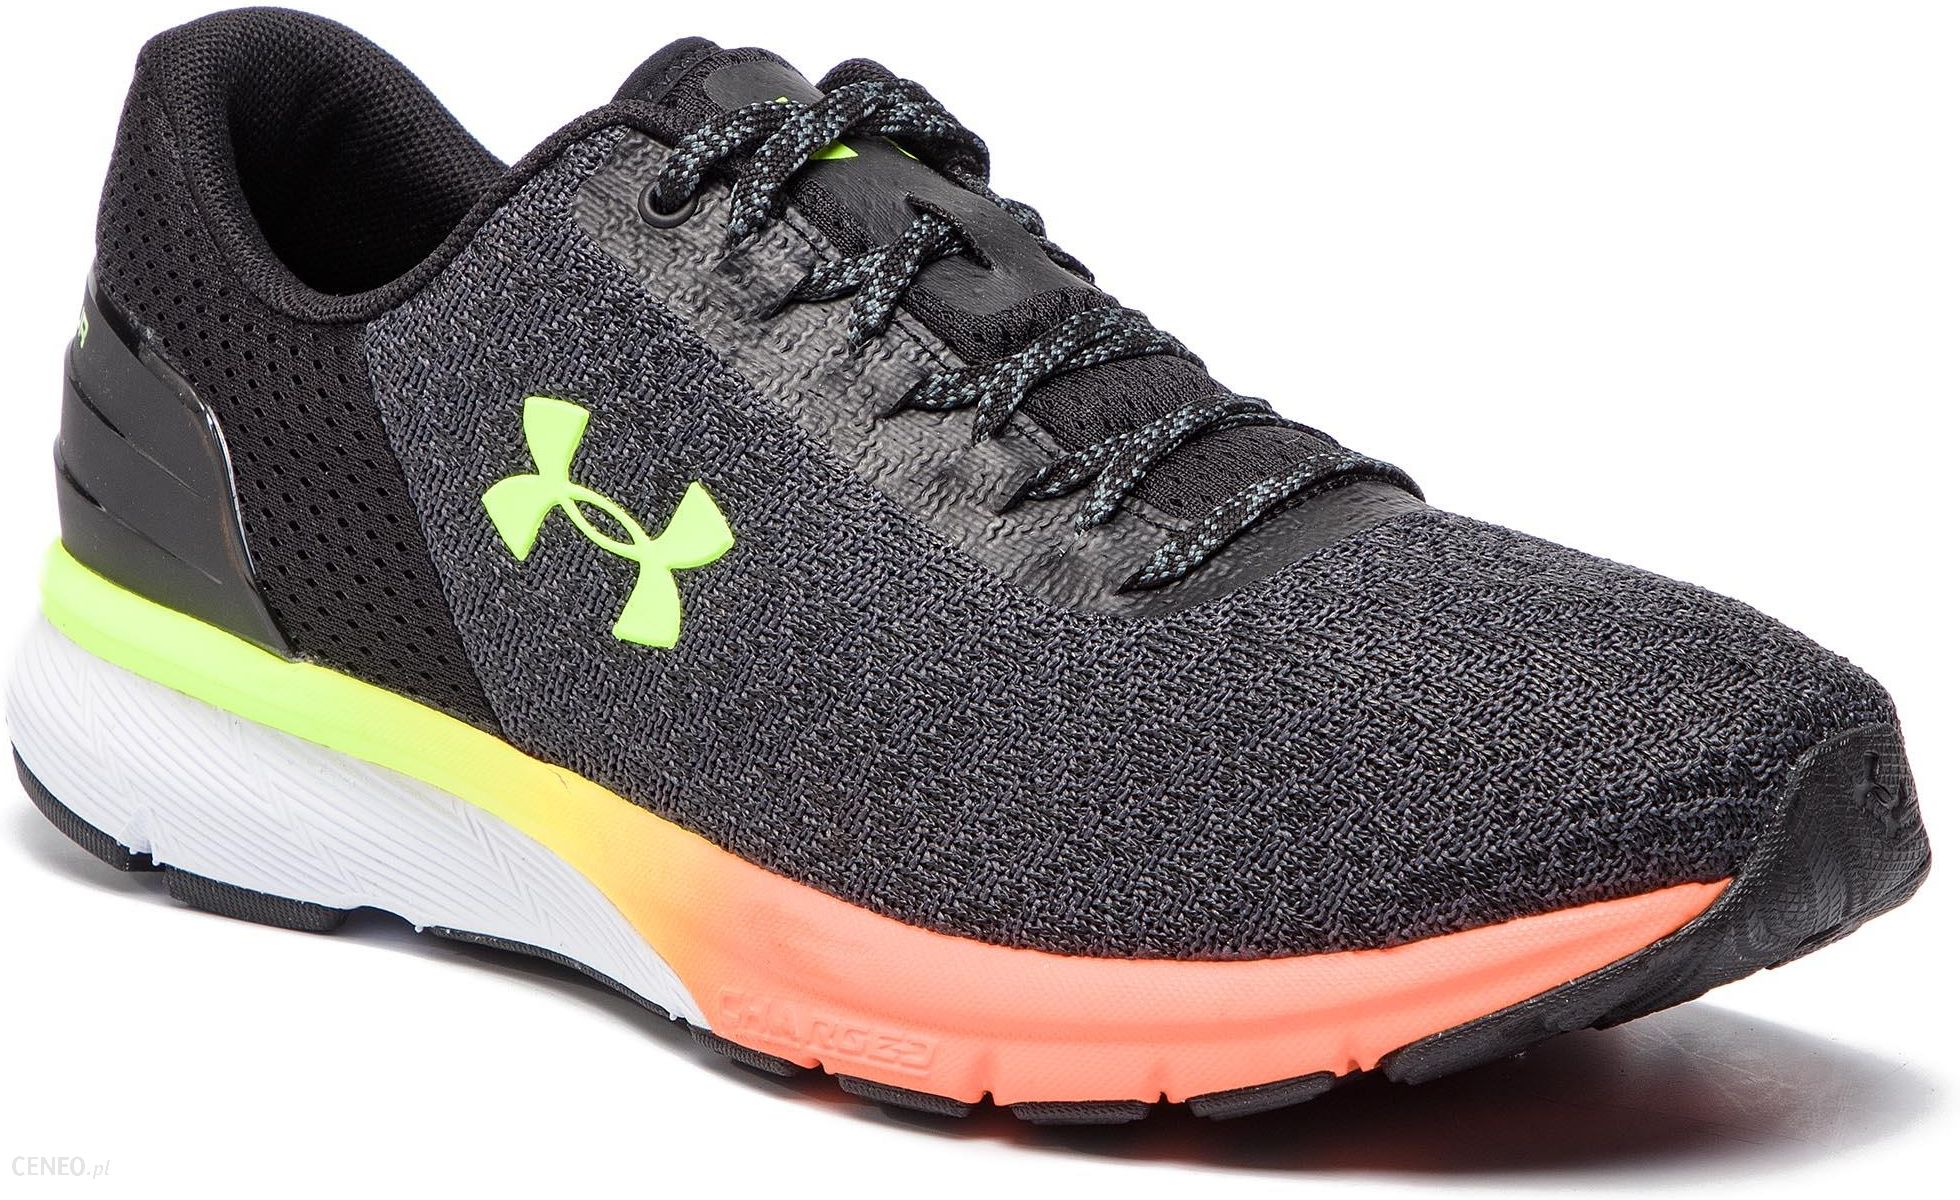 Under Armour Ua Charged 2 3020333 008 Blk - Ceny opinie